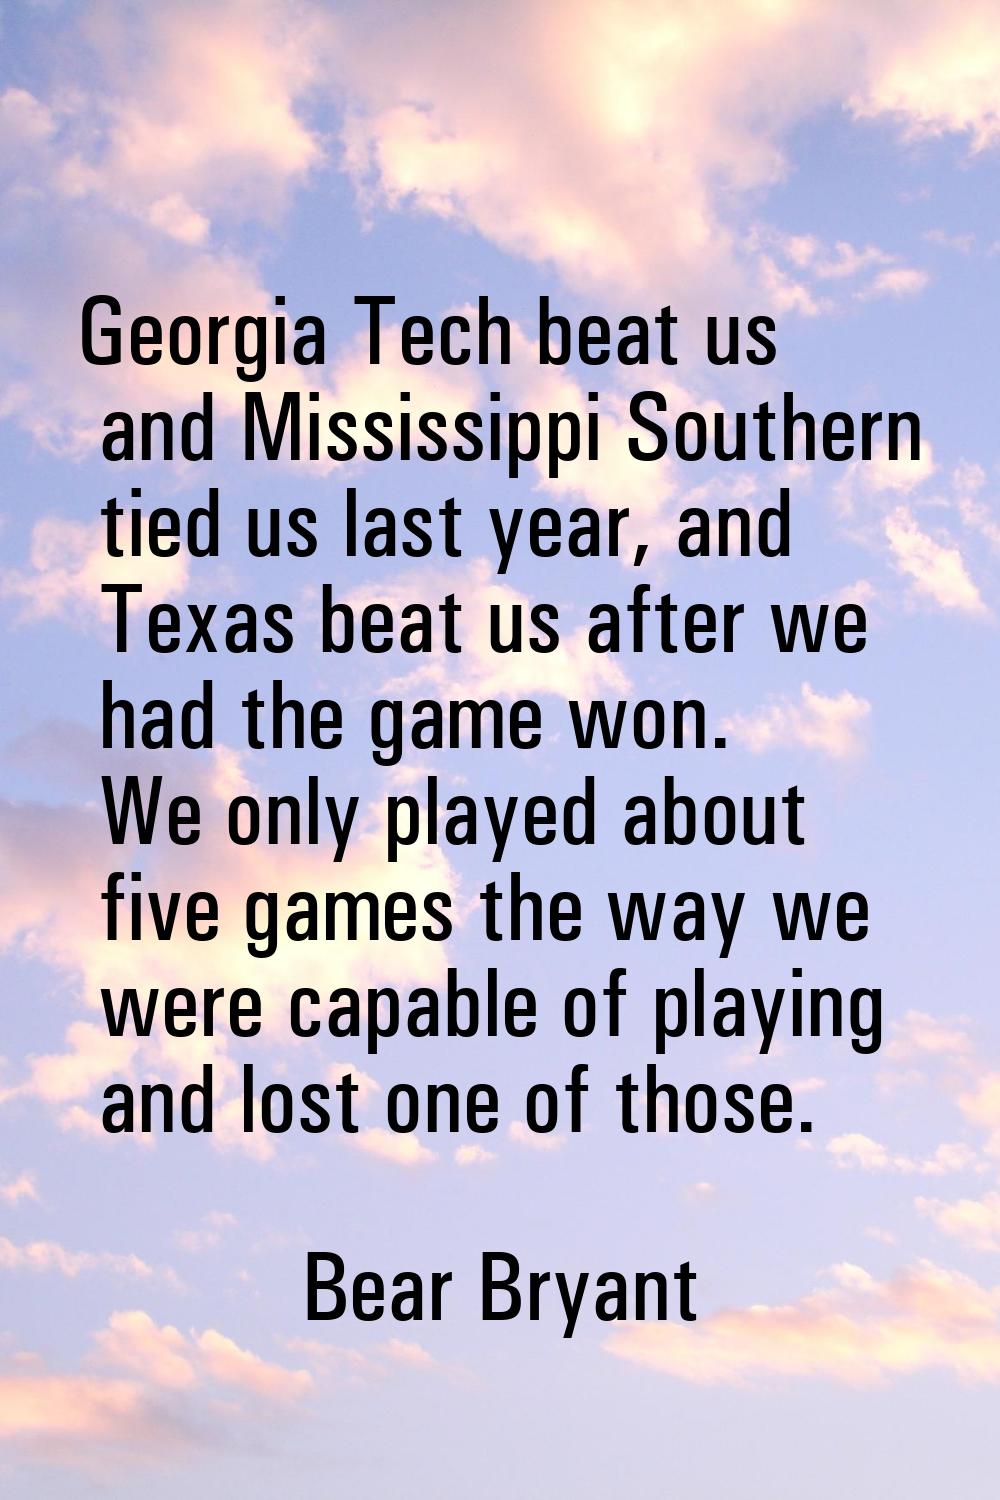 Georgia Tech beat us and Mississippi Southern tied us last year, and Texas beat us after we had the